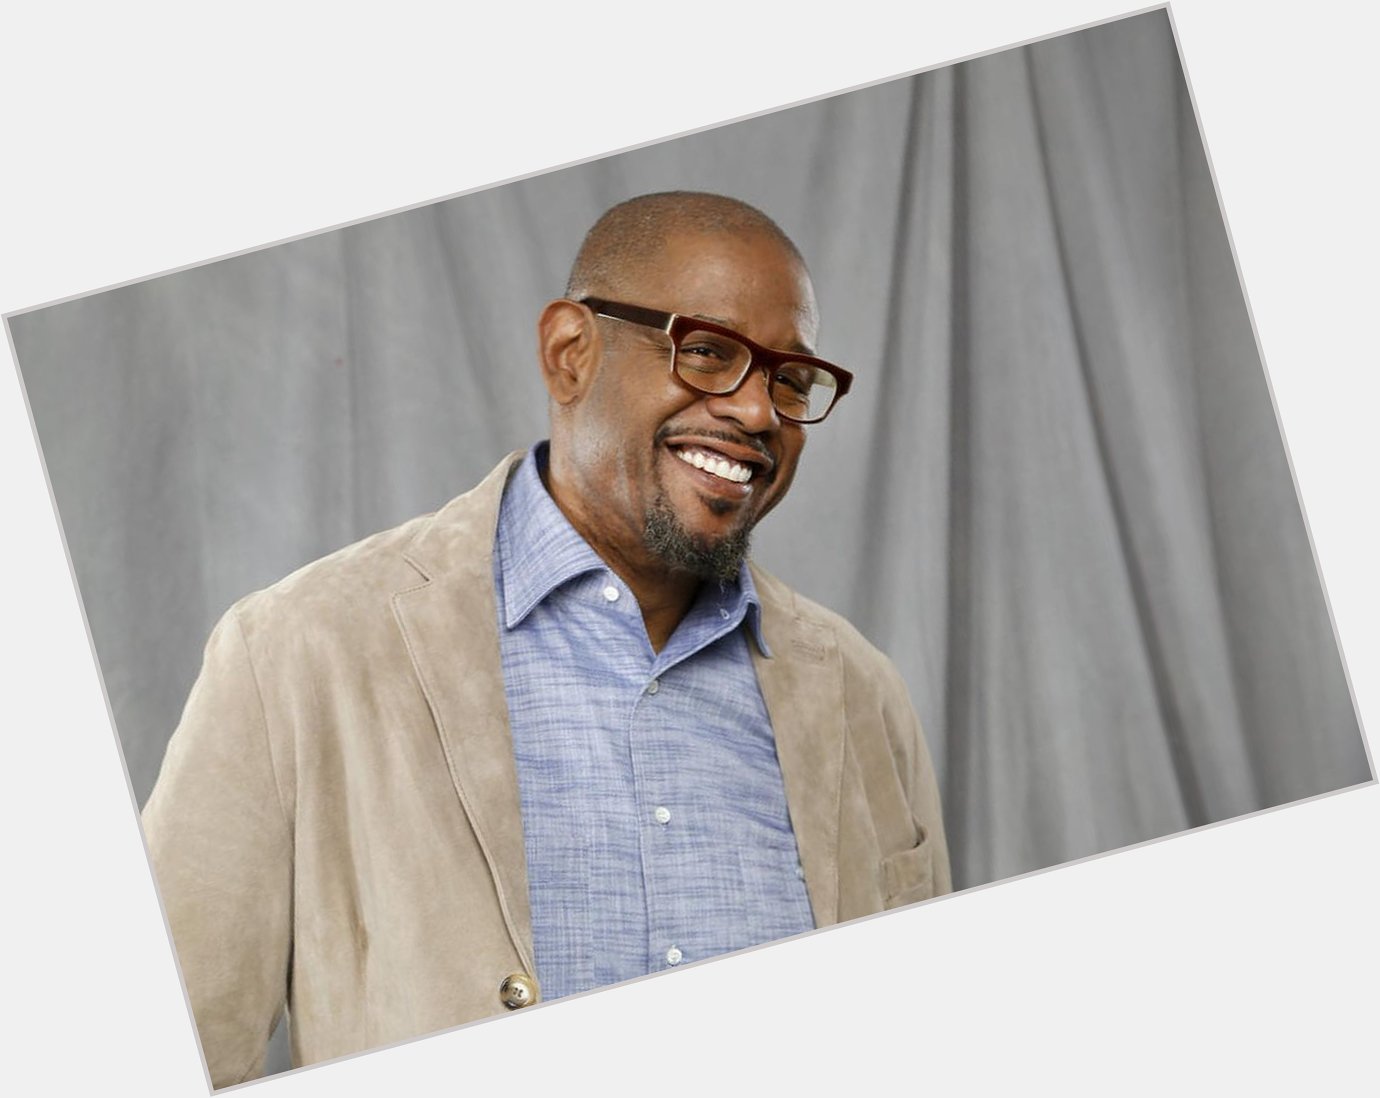 Happy birthday, Forest Whitaker! The actor turns 57 today  